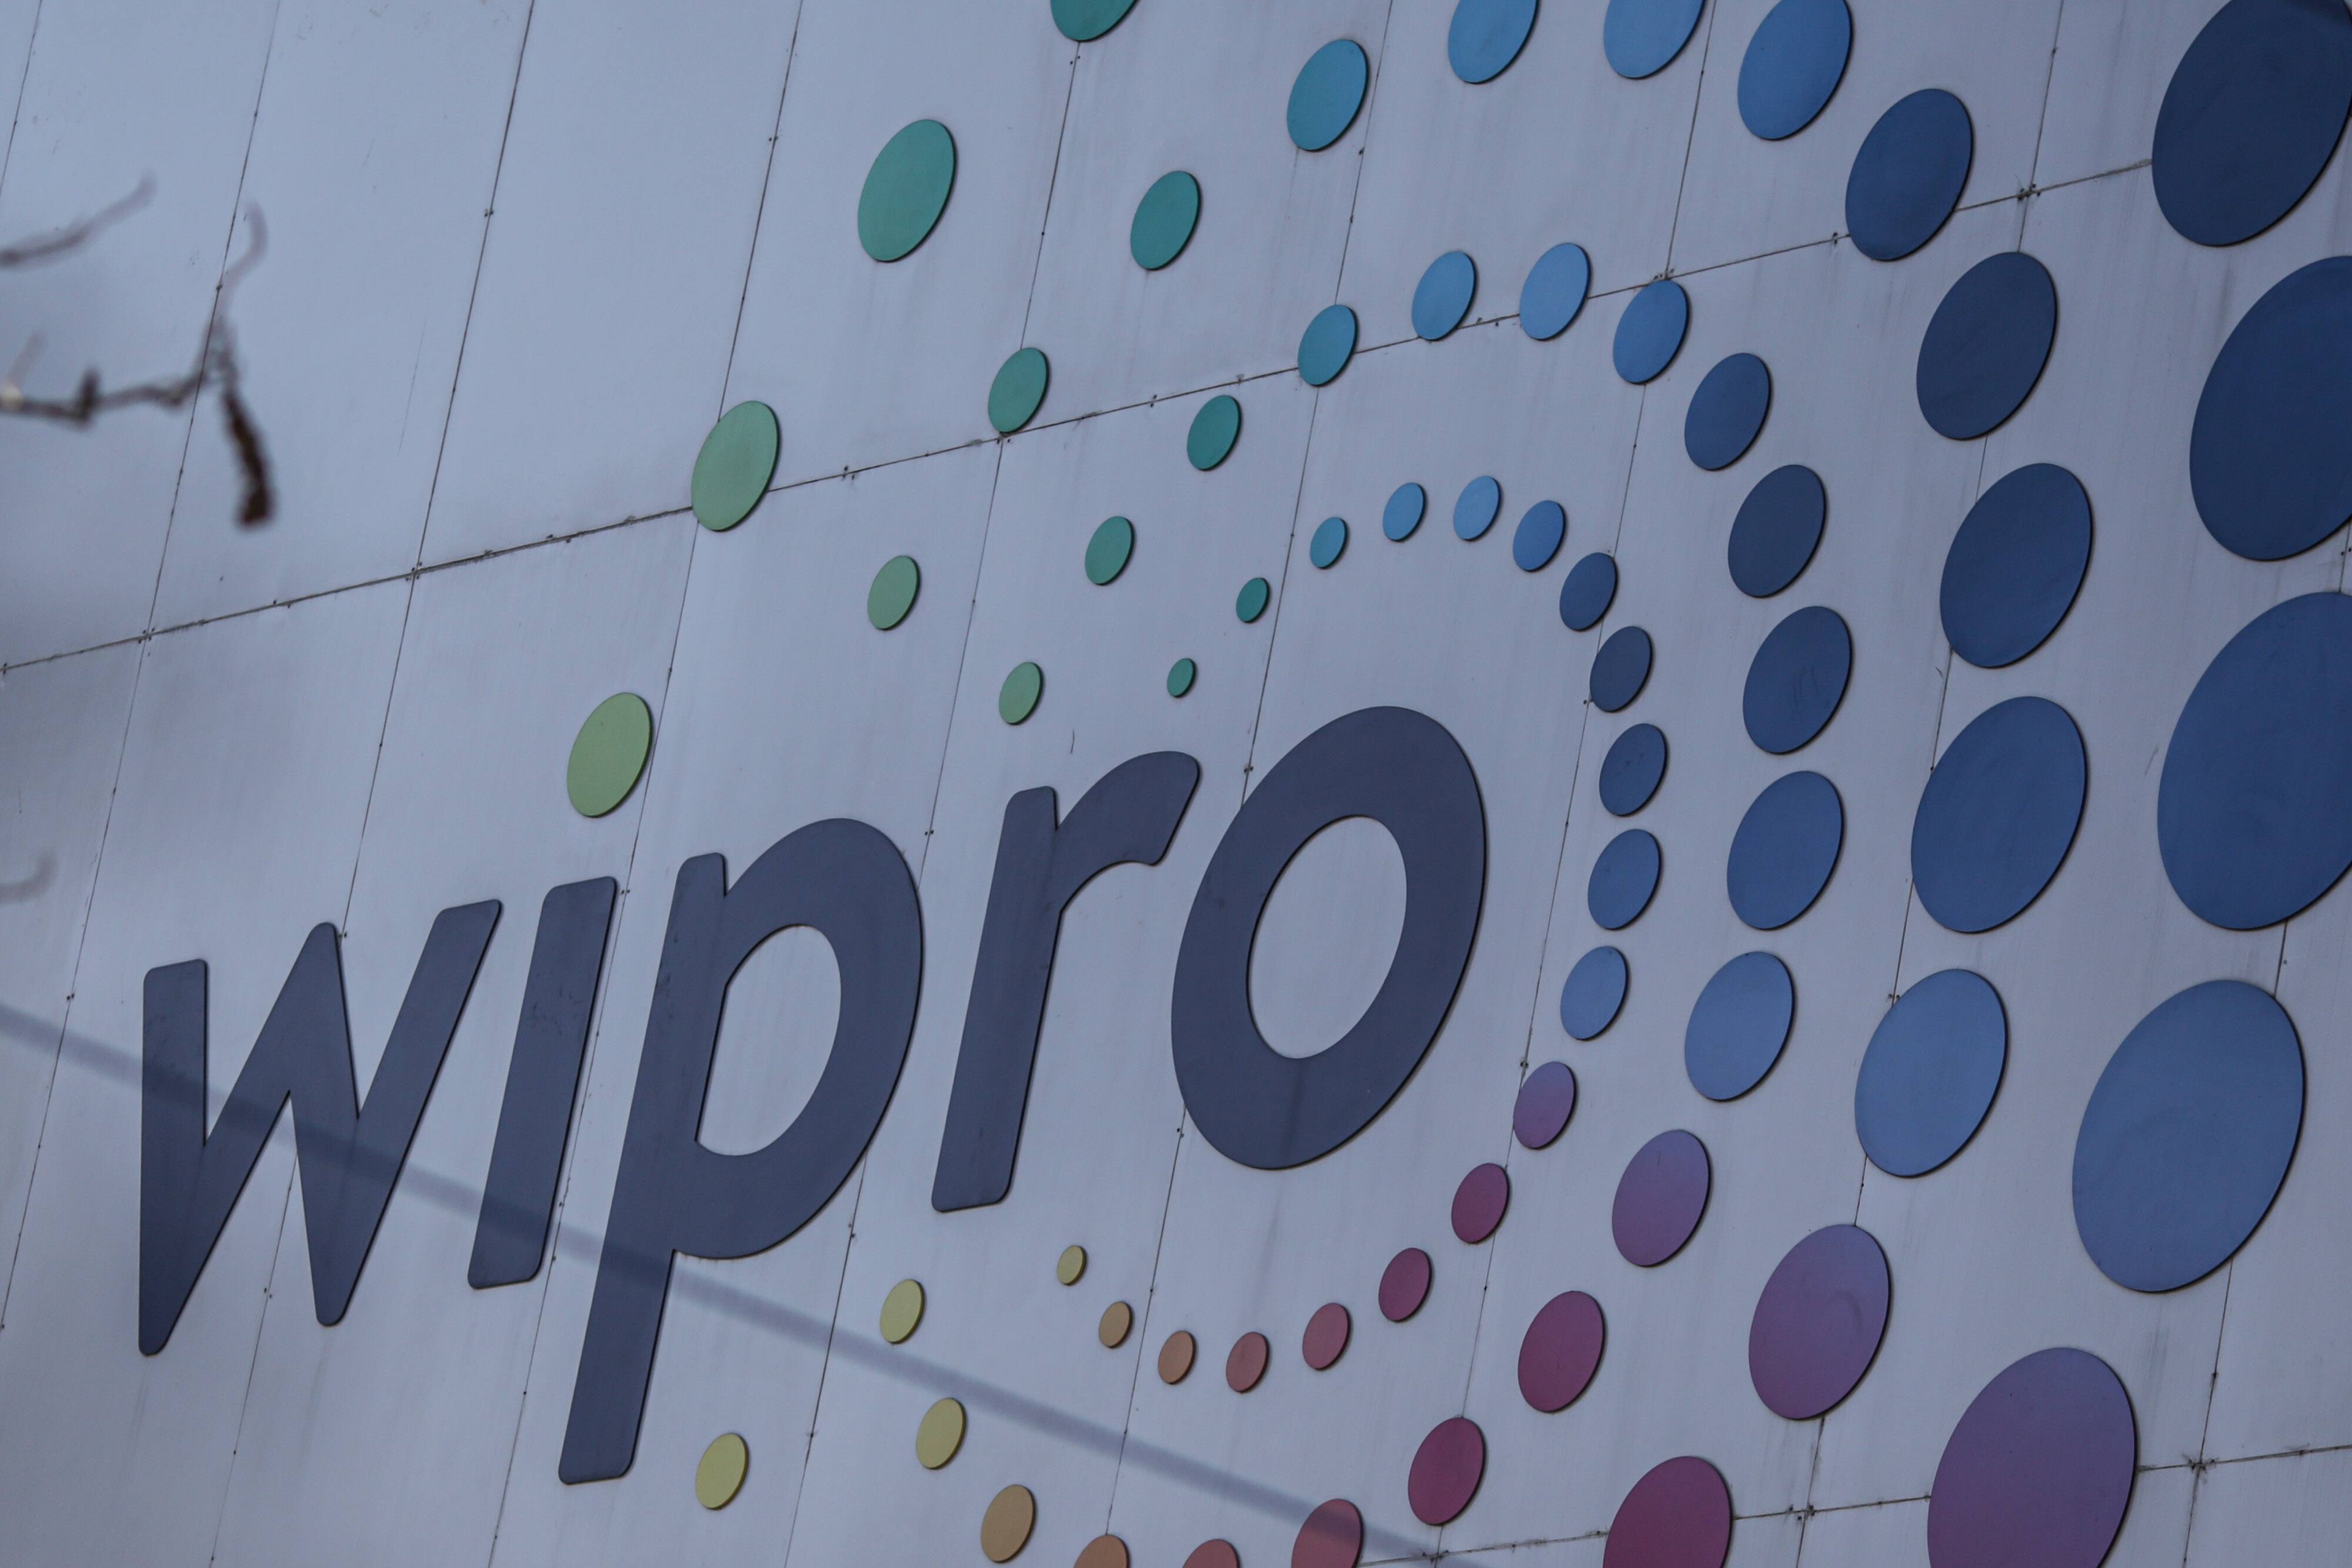 Wipro: The stock fell 4 percent to hit its 52-week low of  <span class='webrupee'>₹</span>481.10 per share on the BSE in today's trade. The IT major has lost around 3.5 percent in May till now and has risen just 2 percent in the last 1 year. In the last 1 month the stock has lost over 20 percent. The firm recently annpunced it Q4 numbers which did not please the Street. Wipro's net profit rose 3.85 percent YoY to  <span class='webrupee'>₹</span>3,087 crore in Q4FY22 and revenue was up 28 percent YoY at  <span class='webrupee'>₹</span>20,860 crore from the previous year's  <span class='webrupee'>₹</span>16,245 crore. 26.5 percent analysts polled by MintGenie has given a 'balanced risk' rating to the stock.